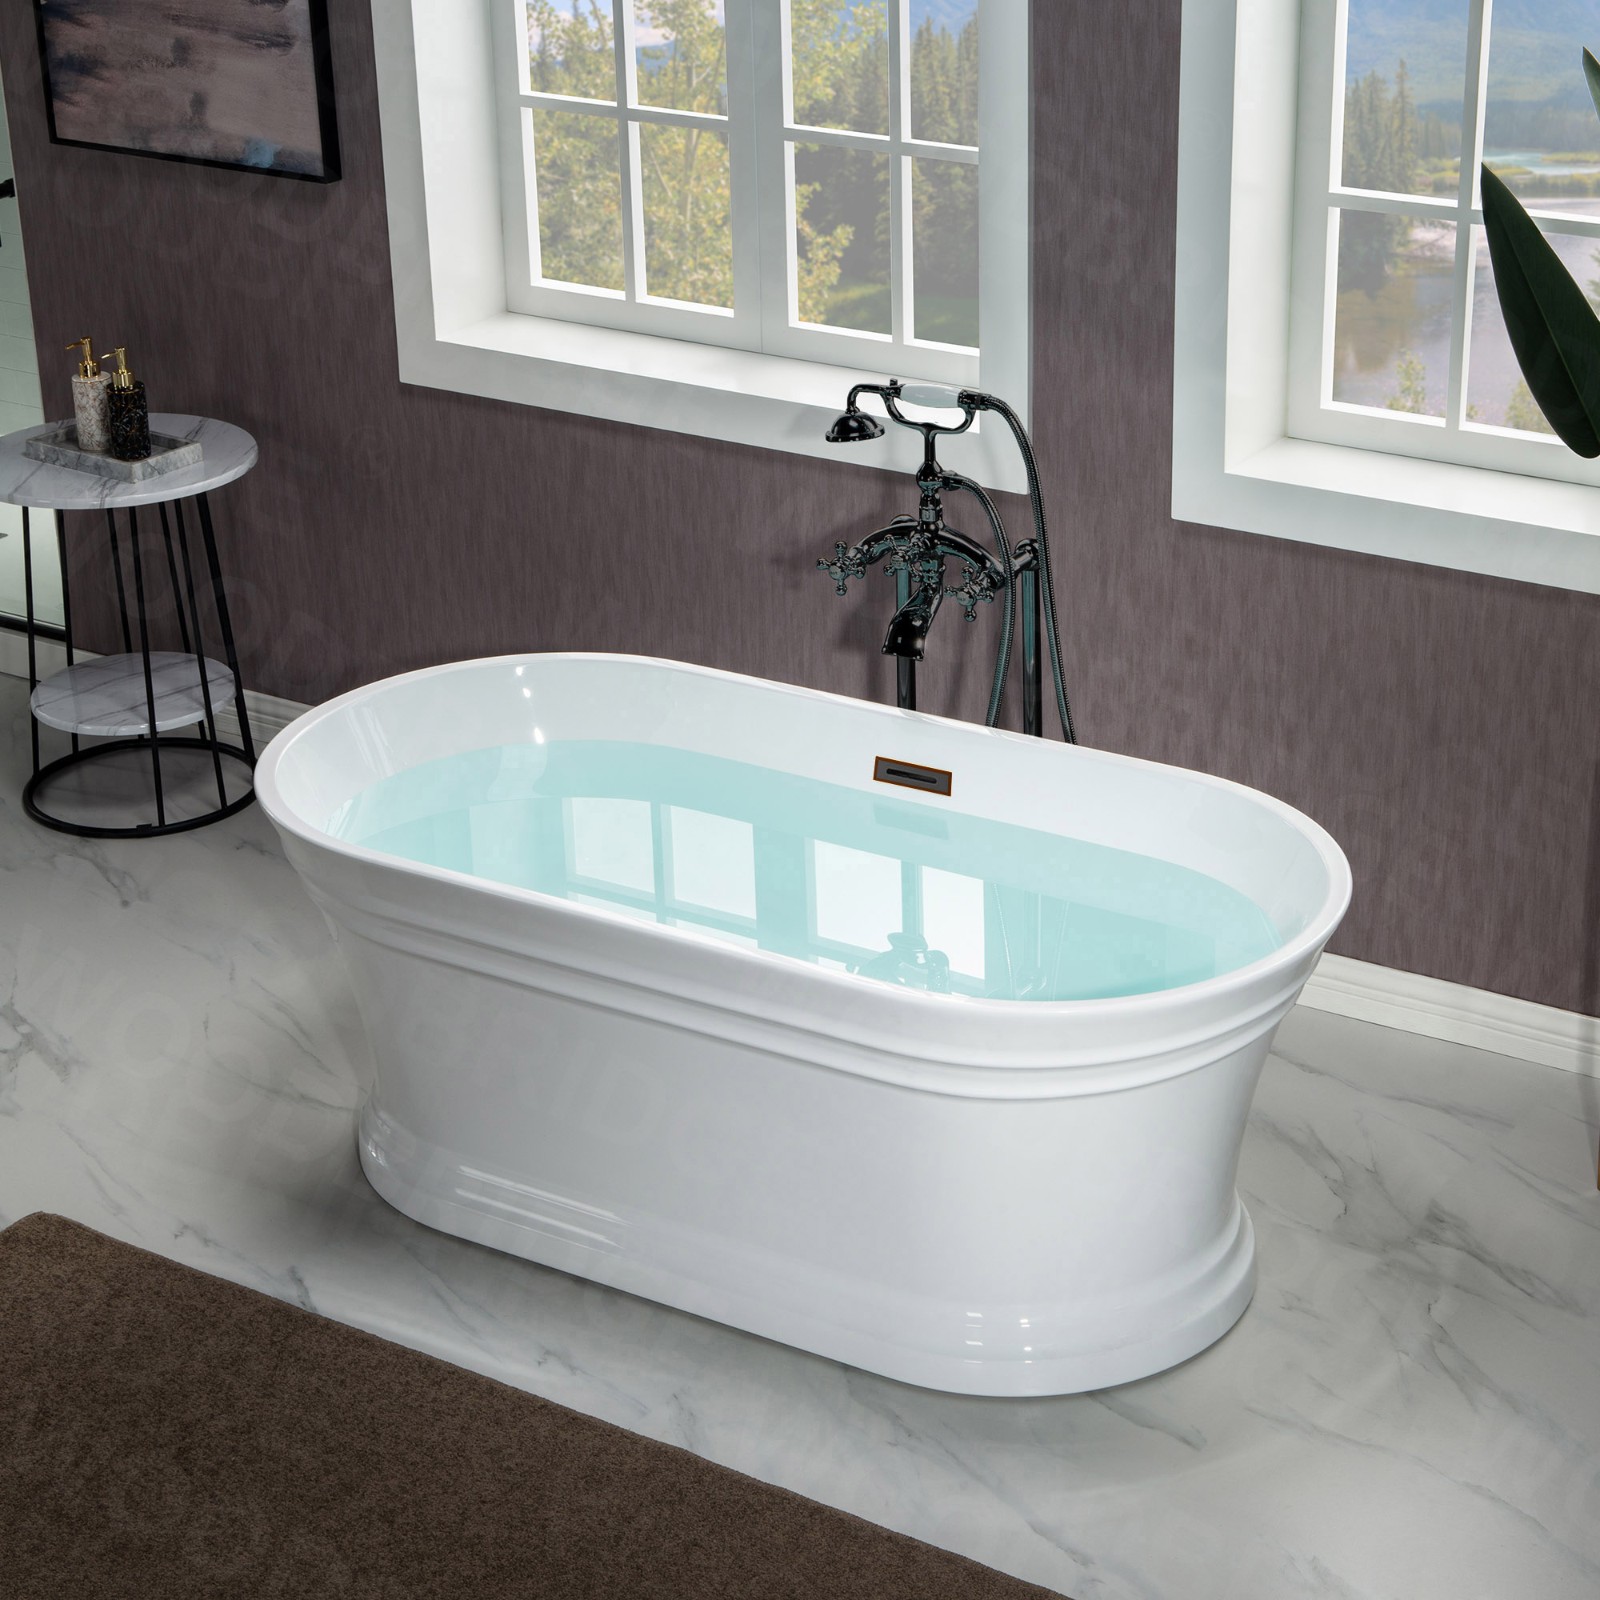  WOODBRIDGE 59 in. Freestanding Double Ended Acrylic Soaking Bathtub with Center Drain Assembly and Overflow, BTA1536/B1536, Glossy White_7784